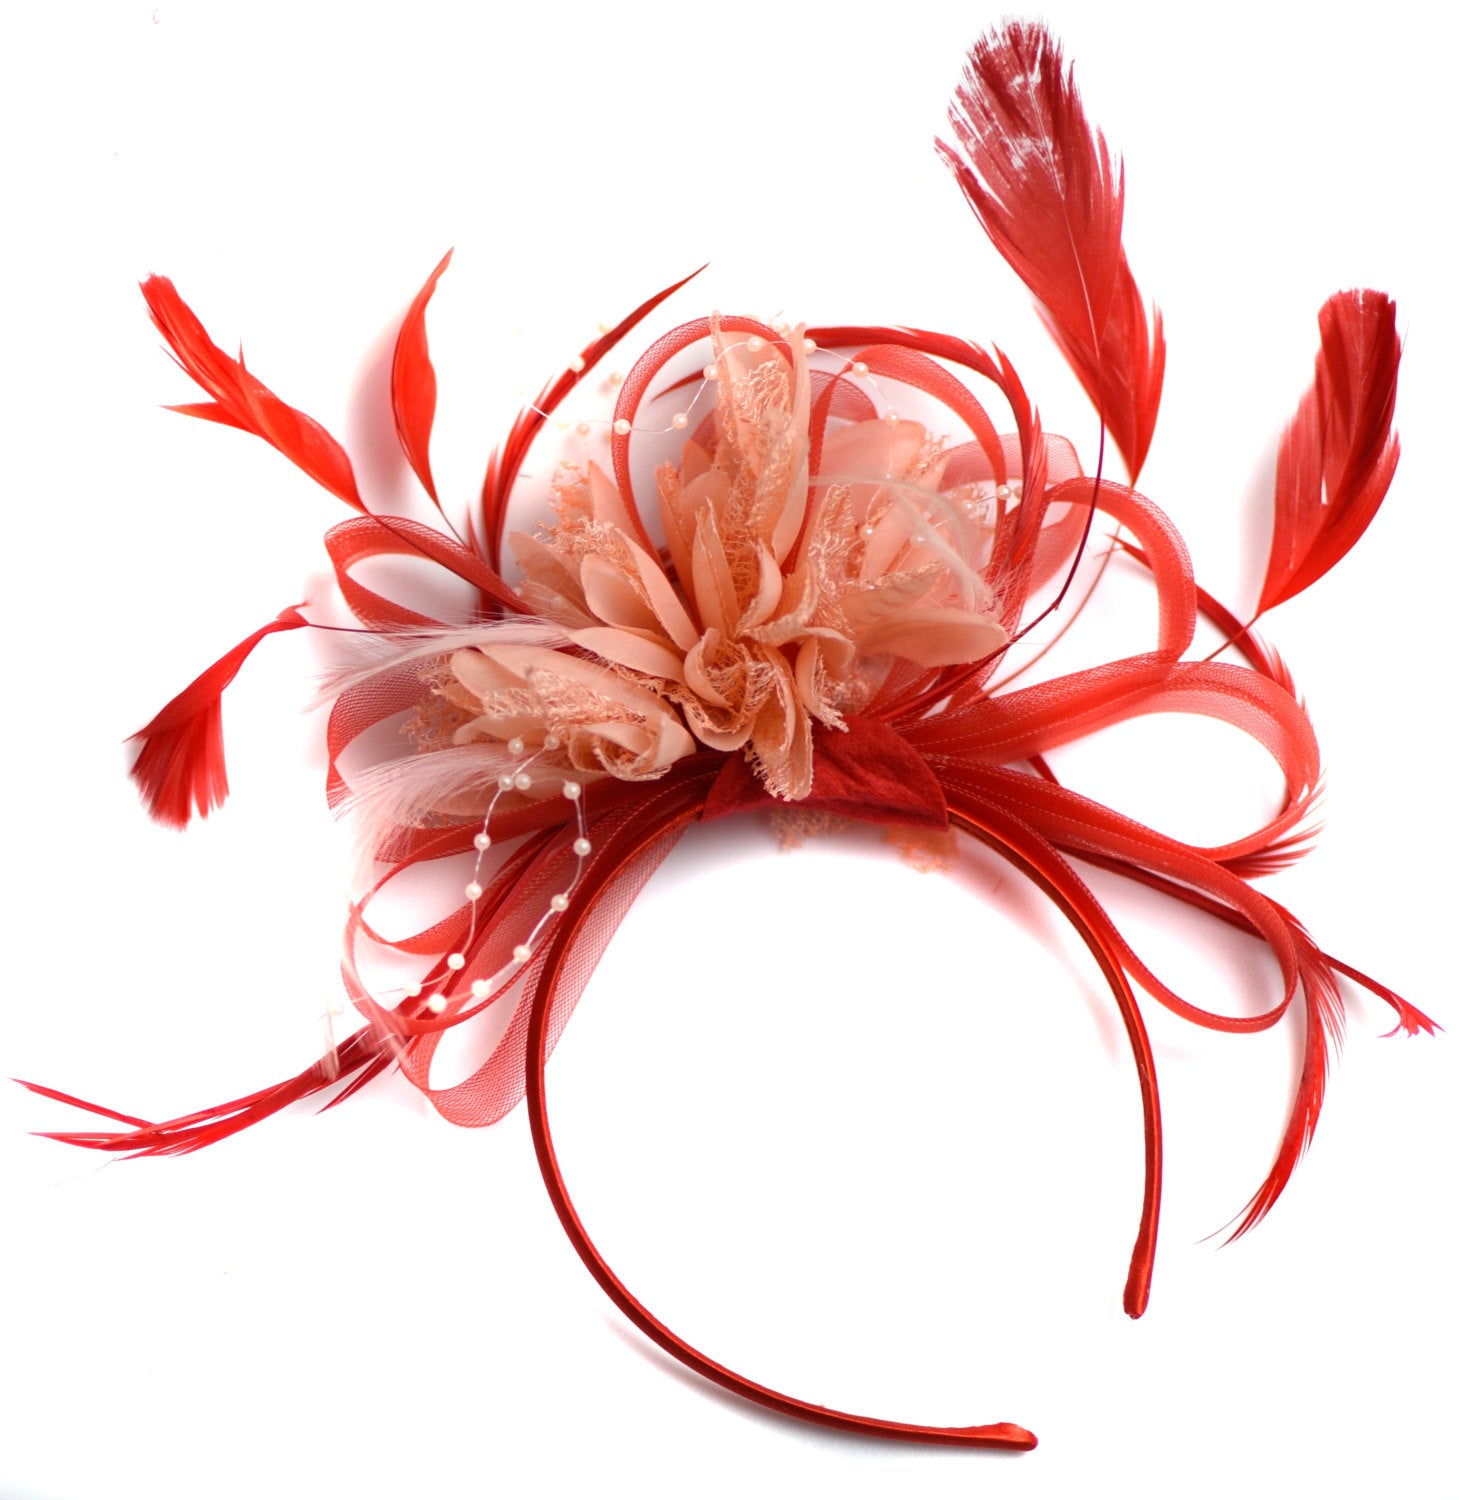 Caprilite Red and Peach Nude Fascinator on Headband Alice Band UK Wedding Ascot Races Derby